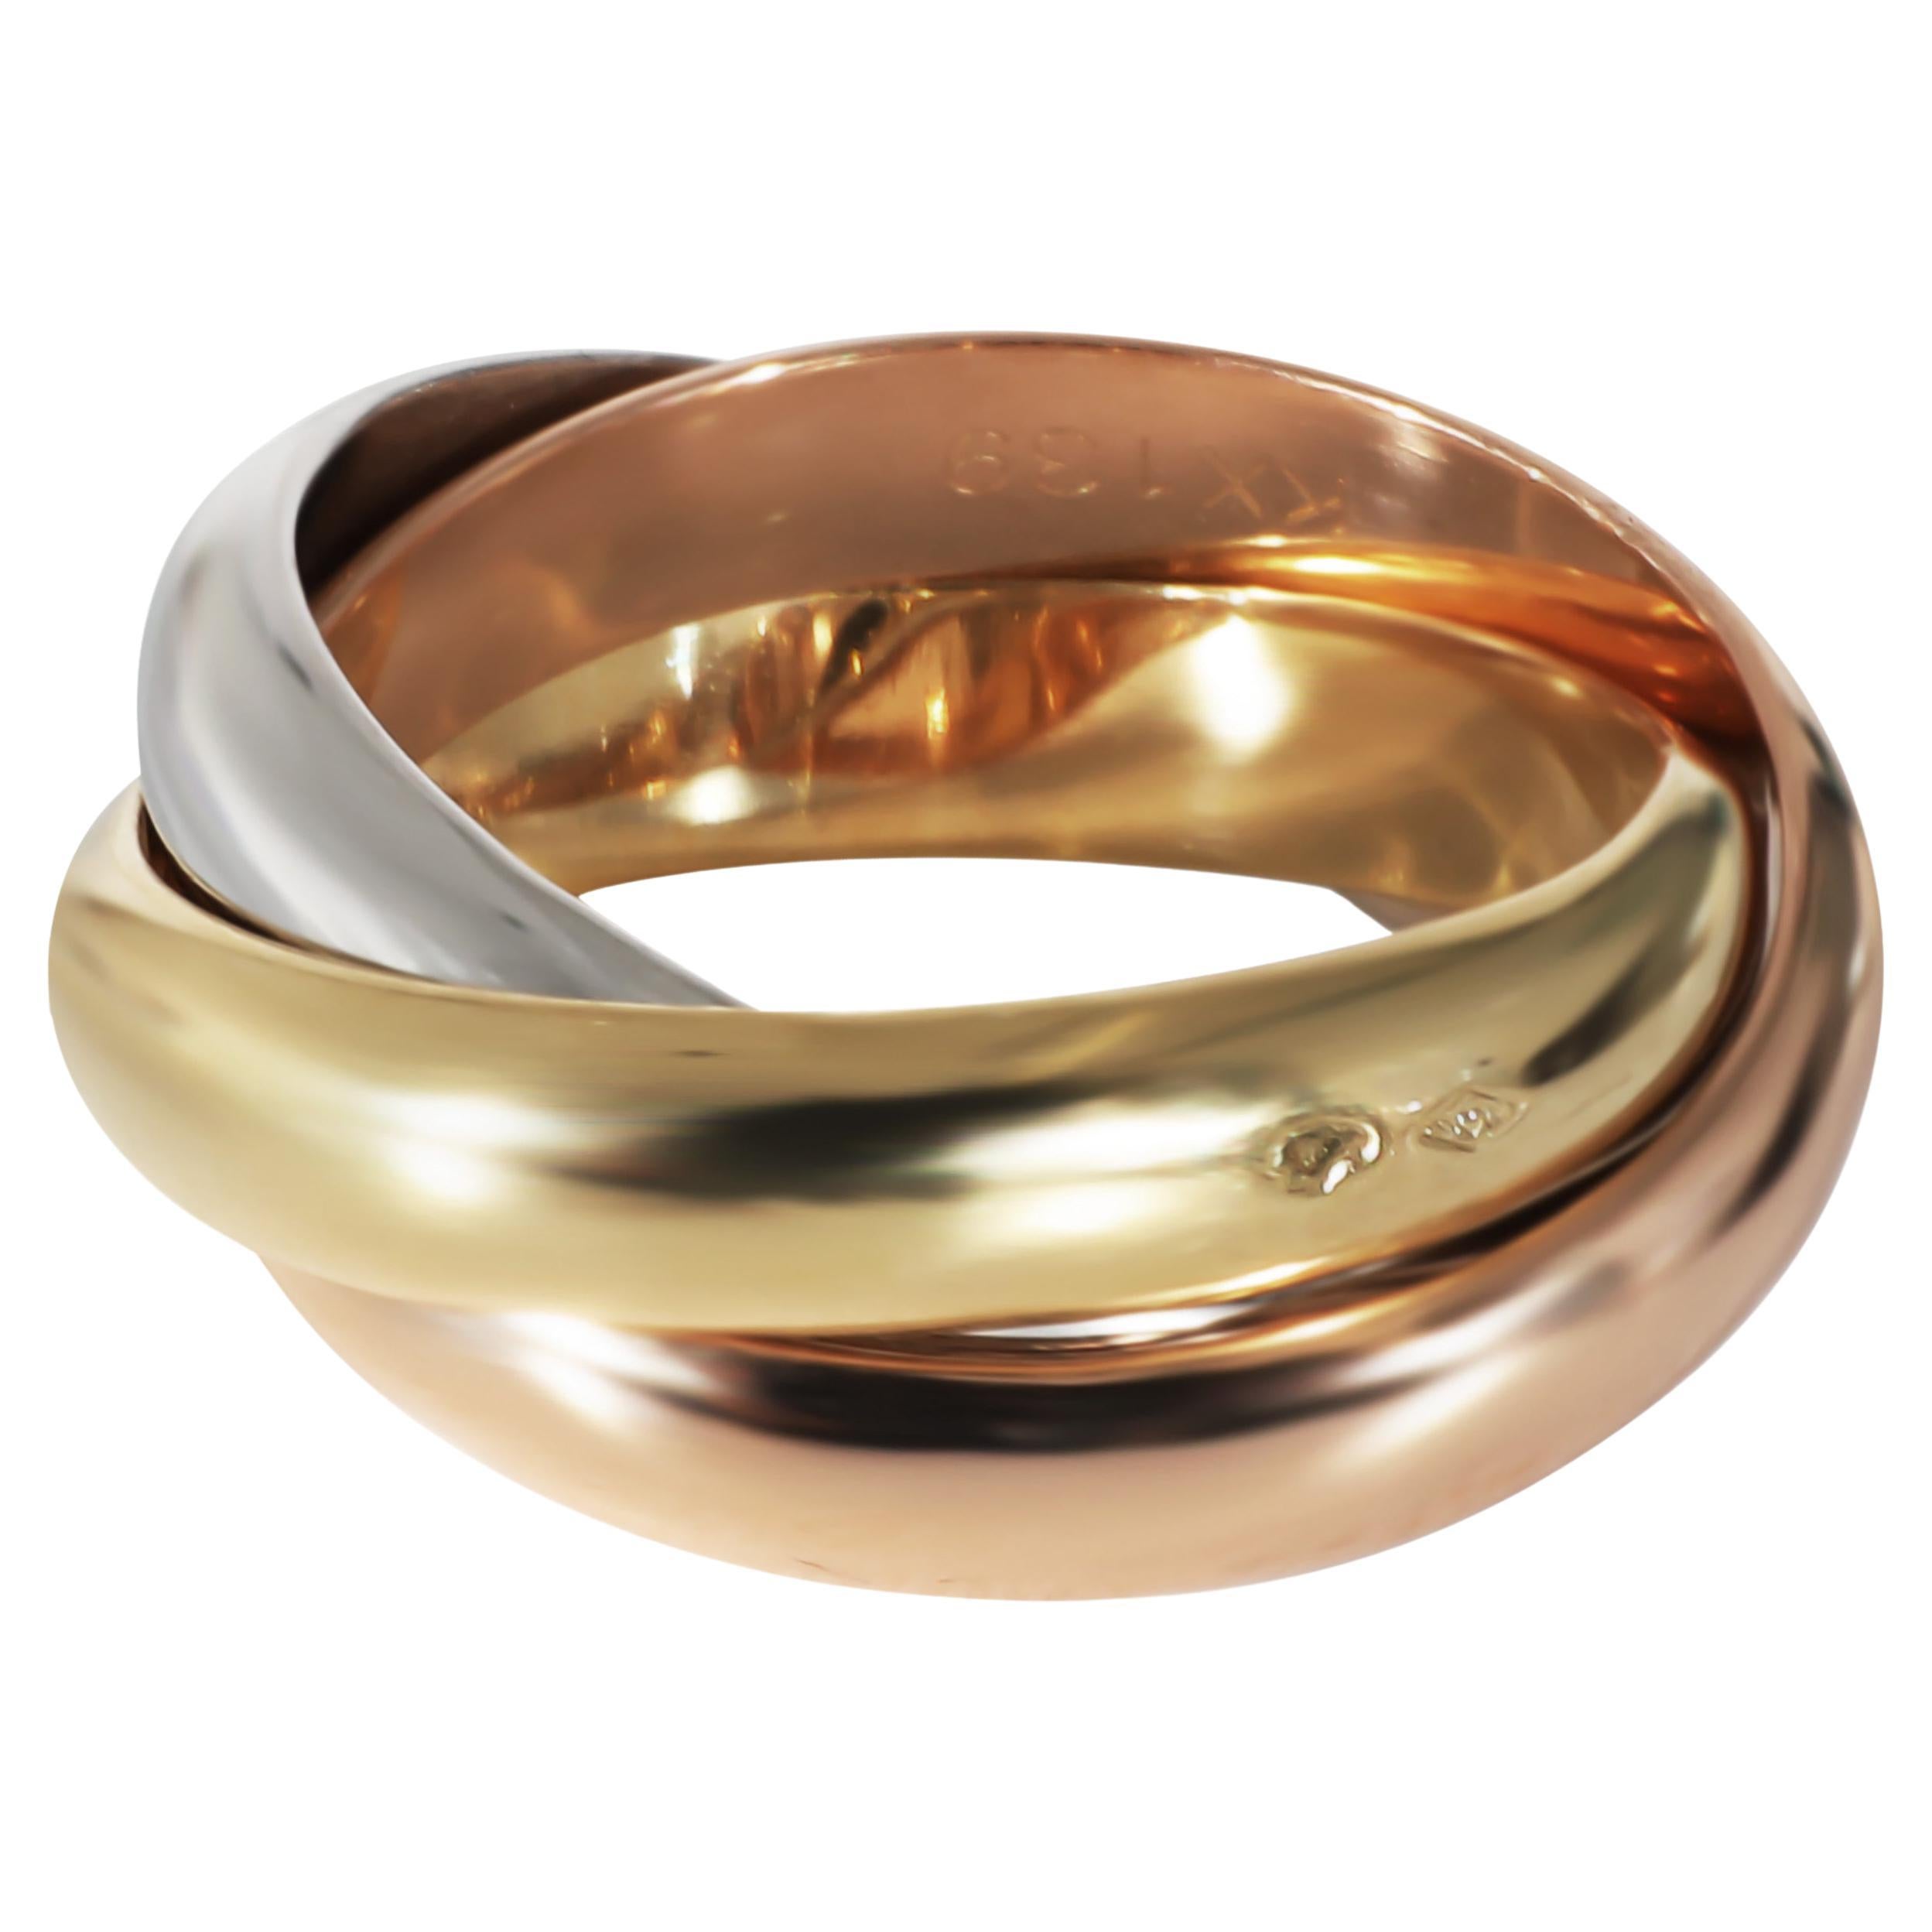 Cartier Trinity Ring in 18k Tri-Color Gold